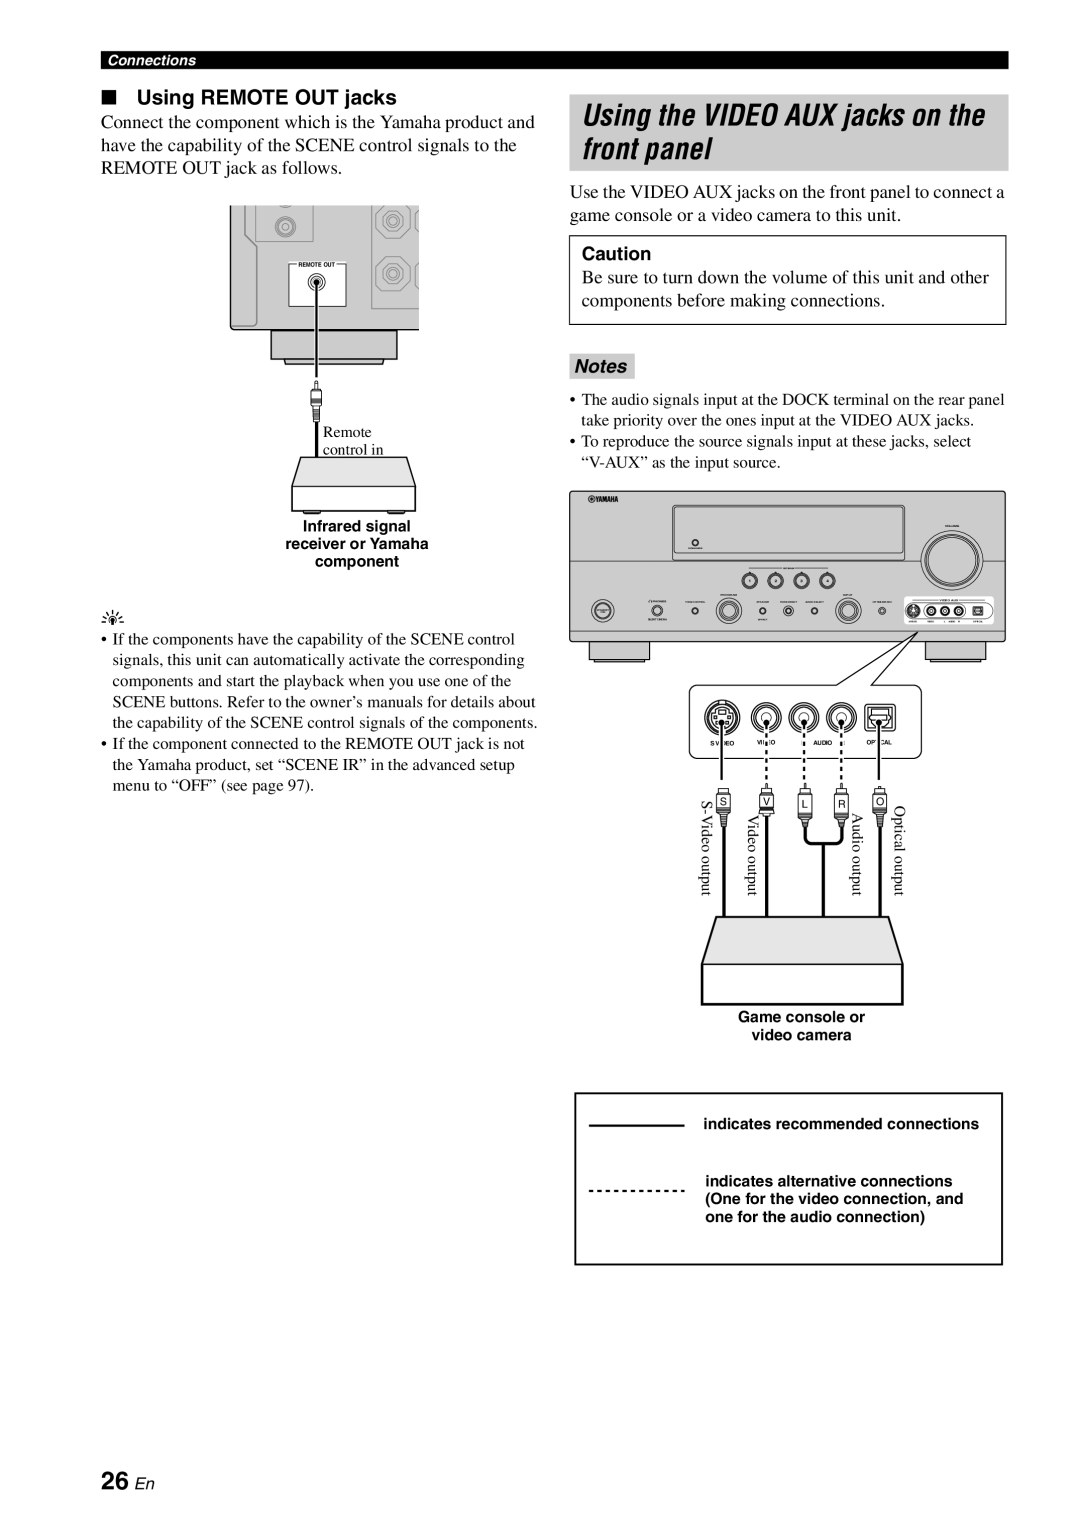 Yamaha DSP-AX863SE owner manual Using the VIDEO AUX jacks on the front panel, 26 En, Using REMOTE OUT jacks, Notes 